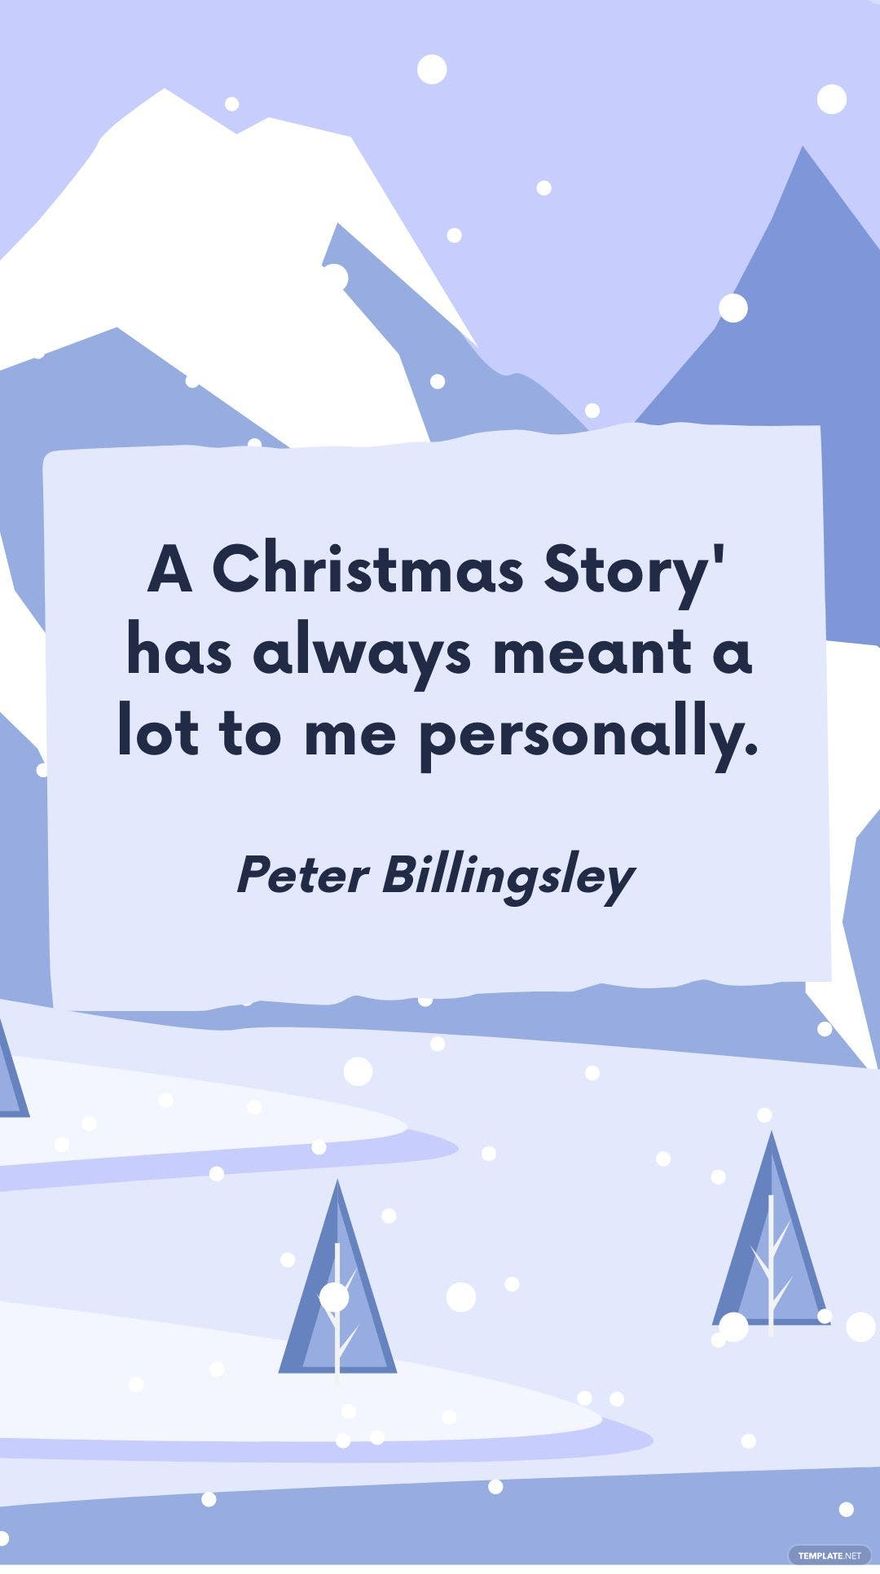 Free Peter Billingsley - A Christmas Story' has always meant a lot to me personally.